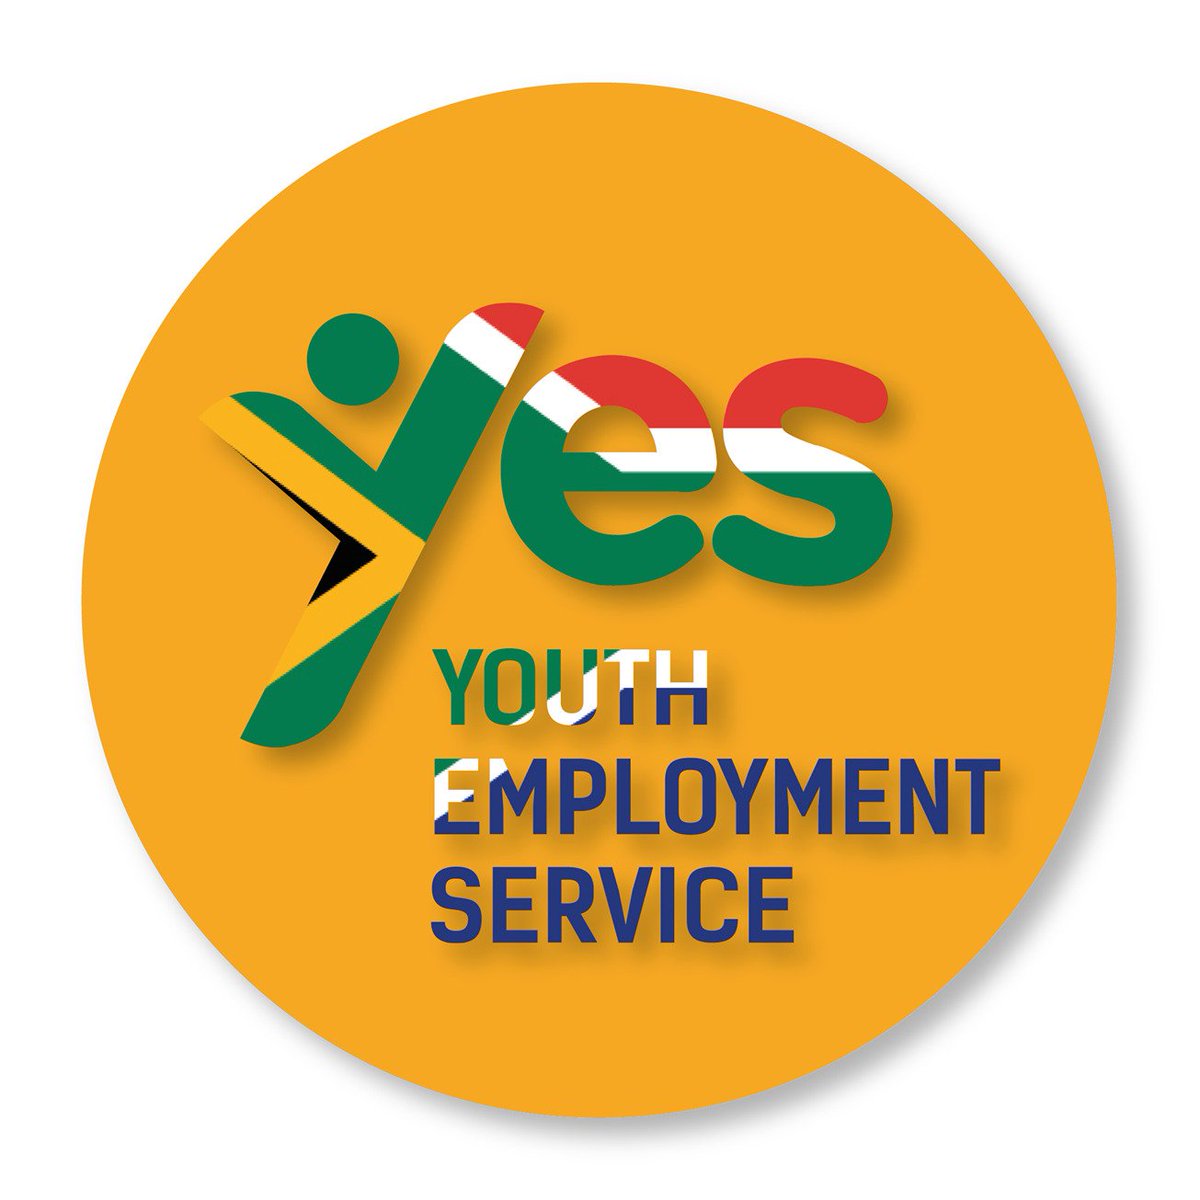 📌Apply for a YES4YOUTH Programme for Unemployed Youth x24 posts 

Duration: 1 year contract

Link to Apply: bit.ly/3IT5SXt

Requirements: 
• Matric / Grade 12
• Ages 18 - 34 years